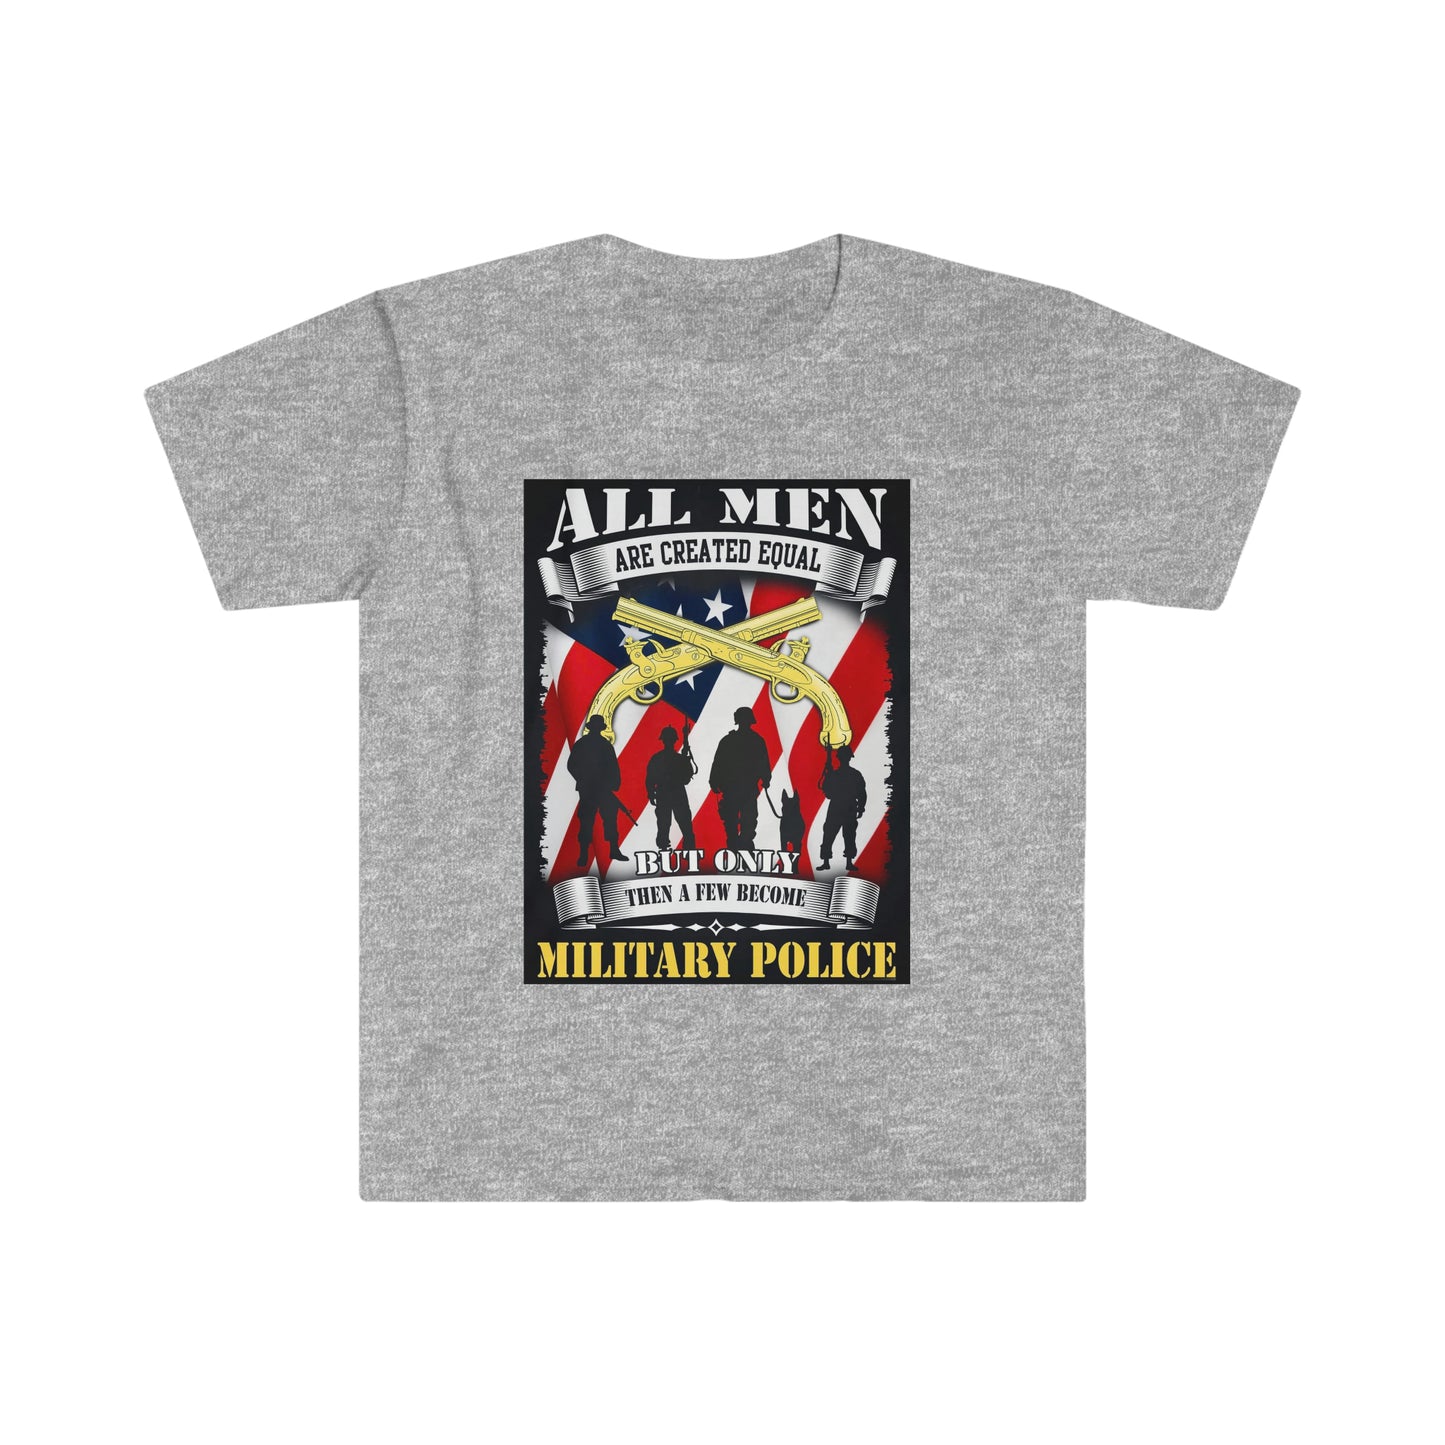 ' All Men Are Created Equal' Military Police , Adult Male / Female Cotton T-Shirt